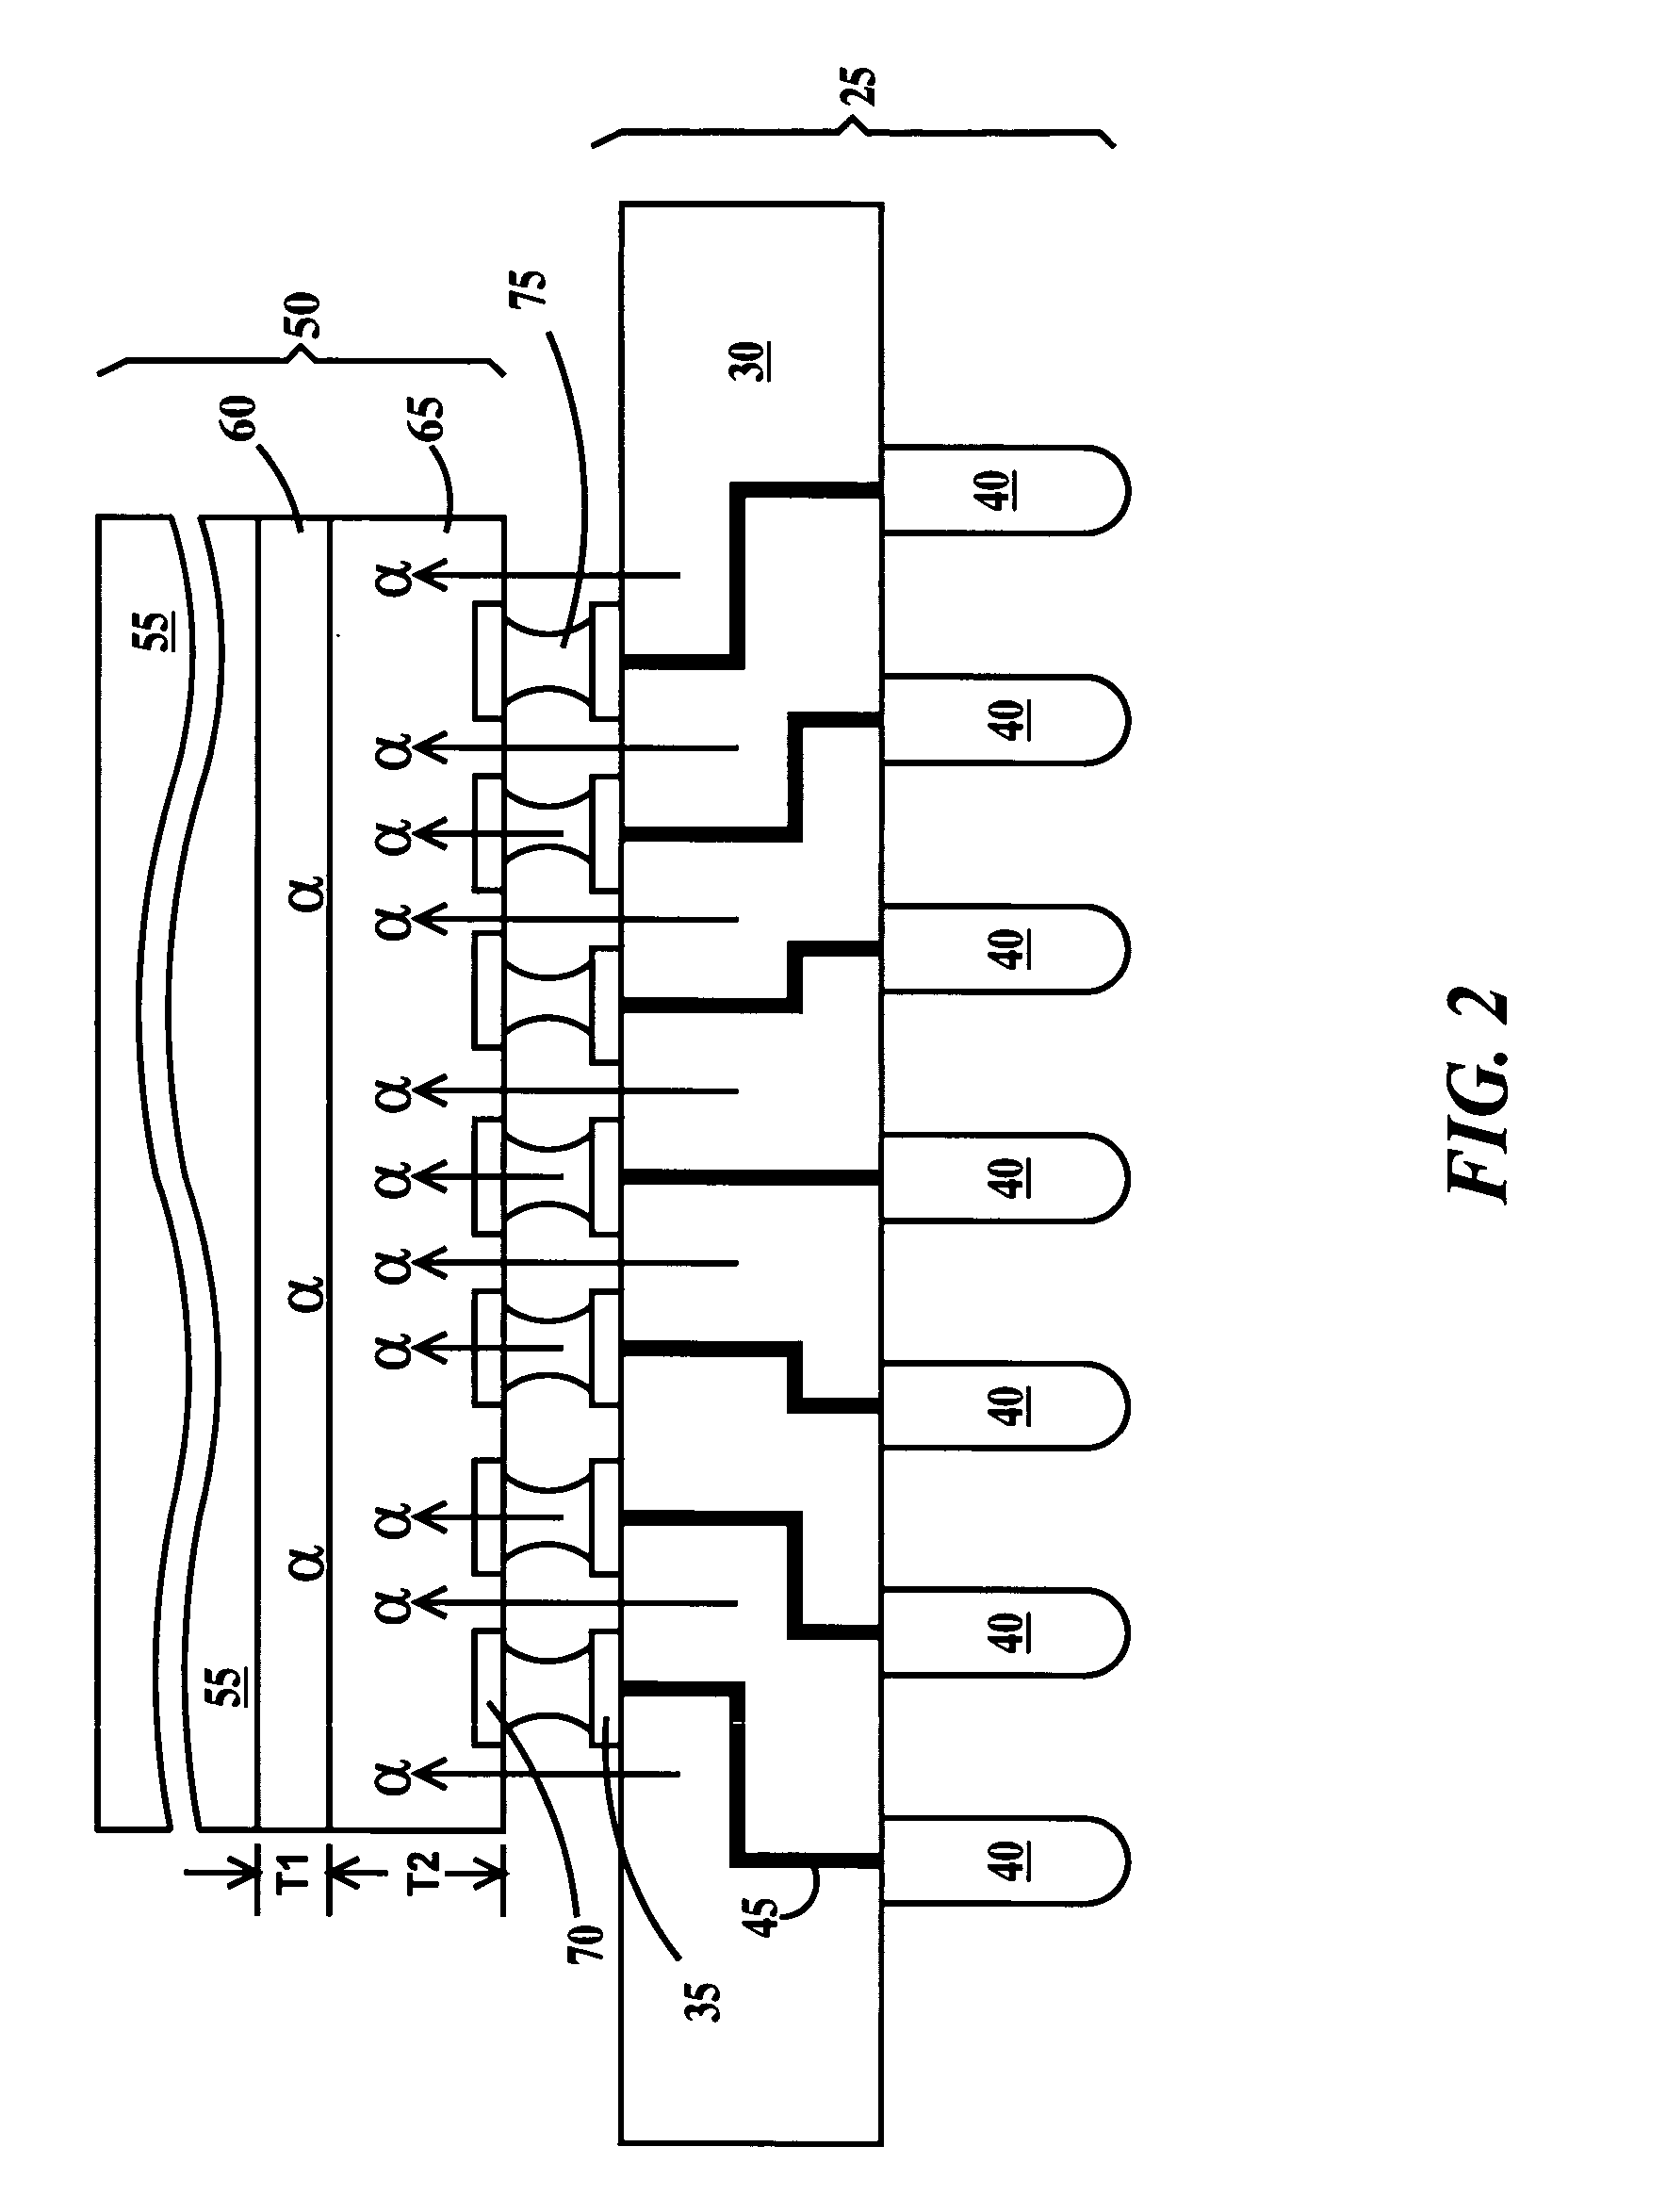 Method and structure for reduction of soft error rates in integrated circuits